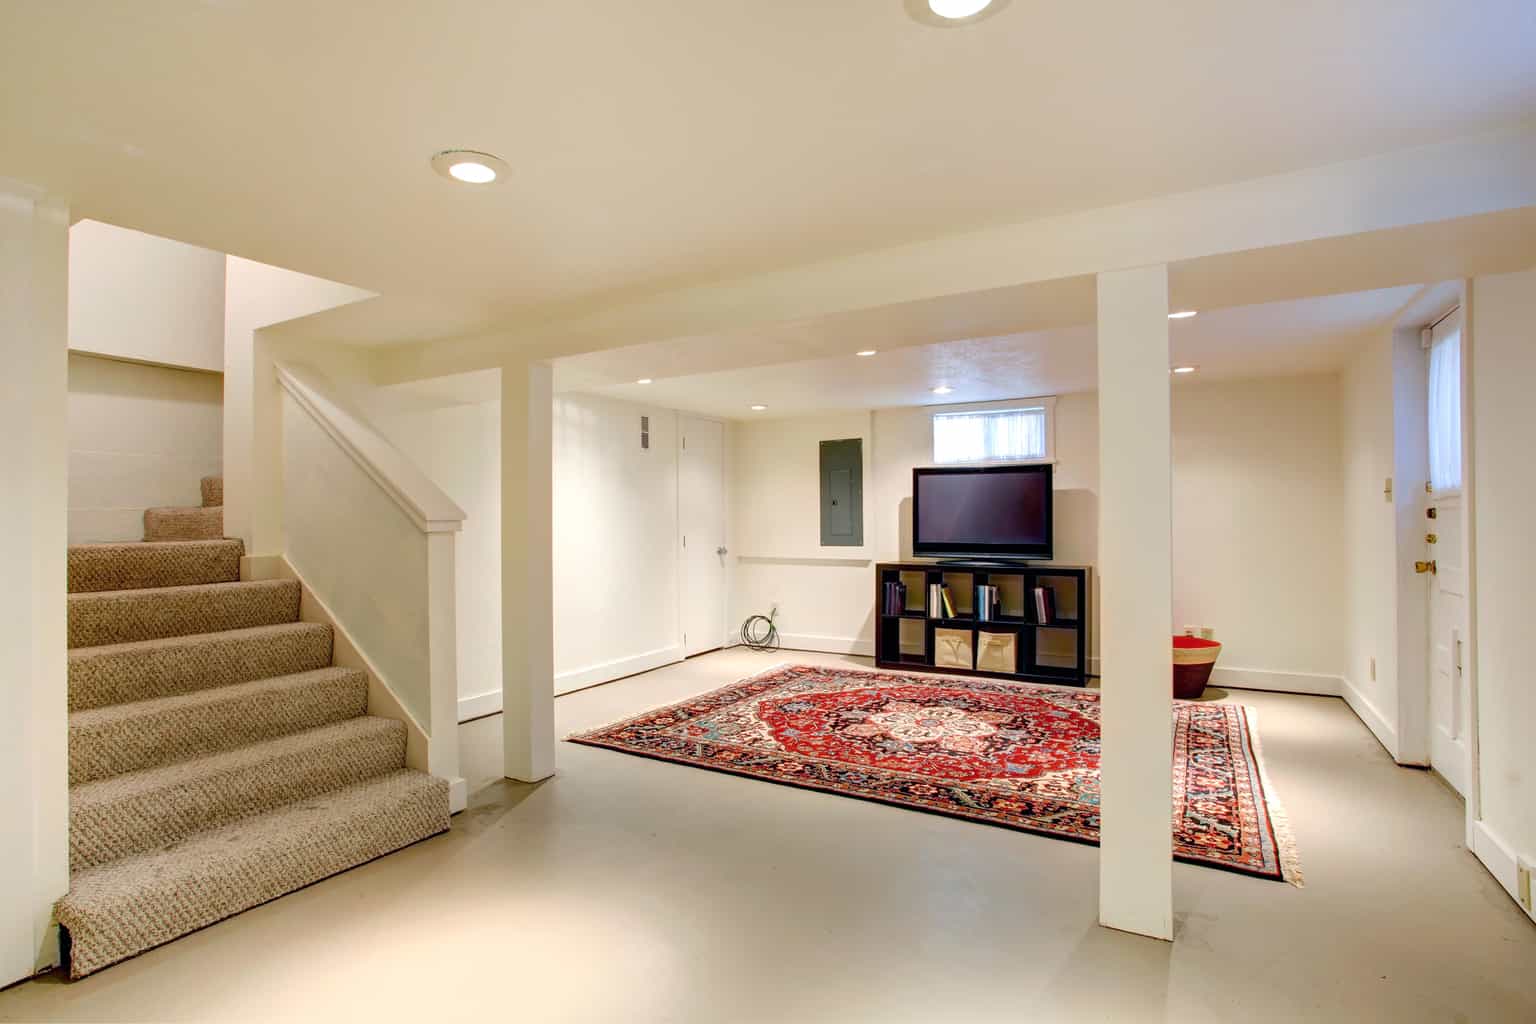 6 Best Drop Ceiling Alternatives For Your Basement - How Much Does A Basement Drop Ceiling Cost